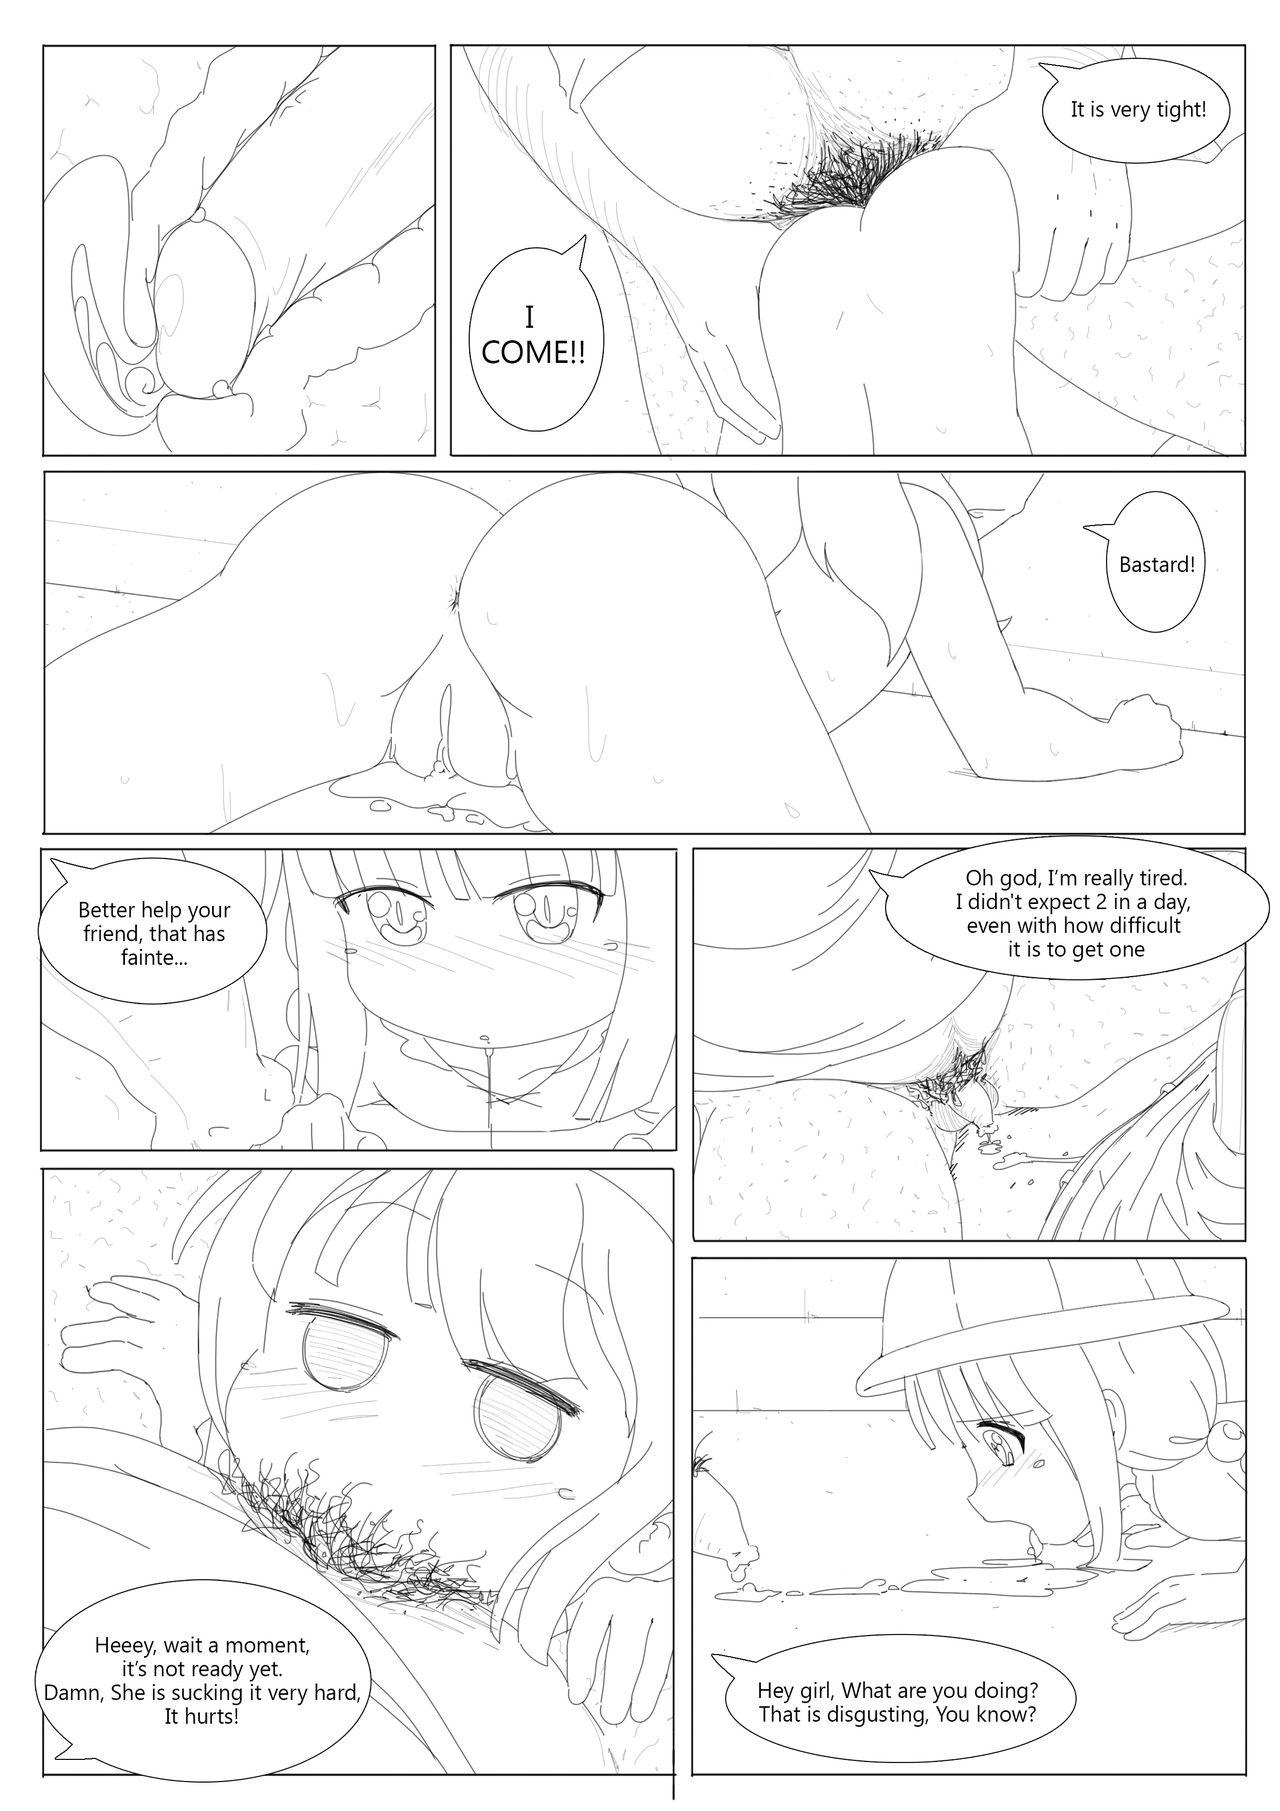 ComicTED Vol 2 [Radioactive Cockroach] Ted The Ero Dinasty (The Cum Hungry Dragon Loli) 4